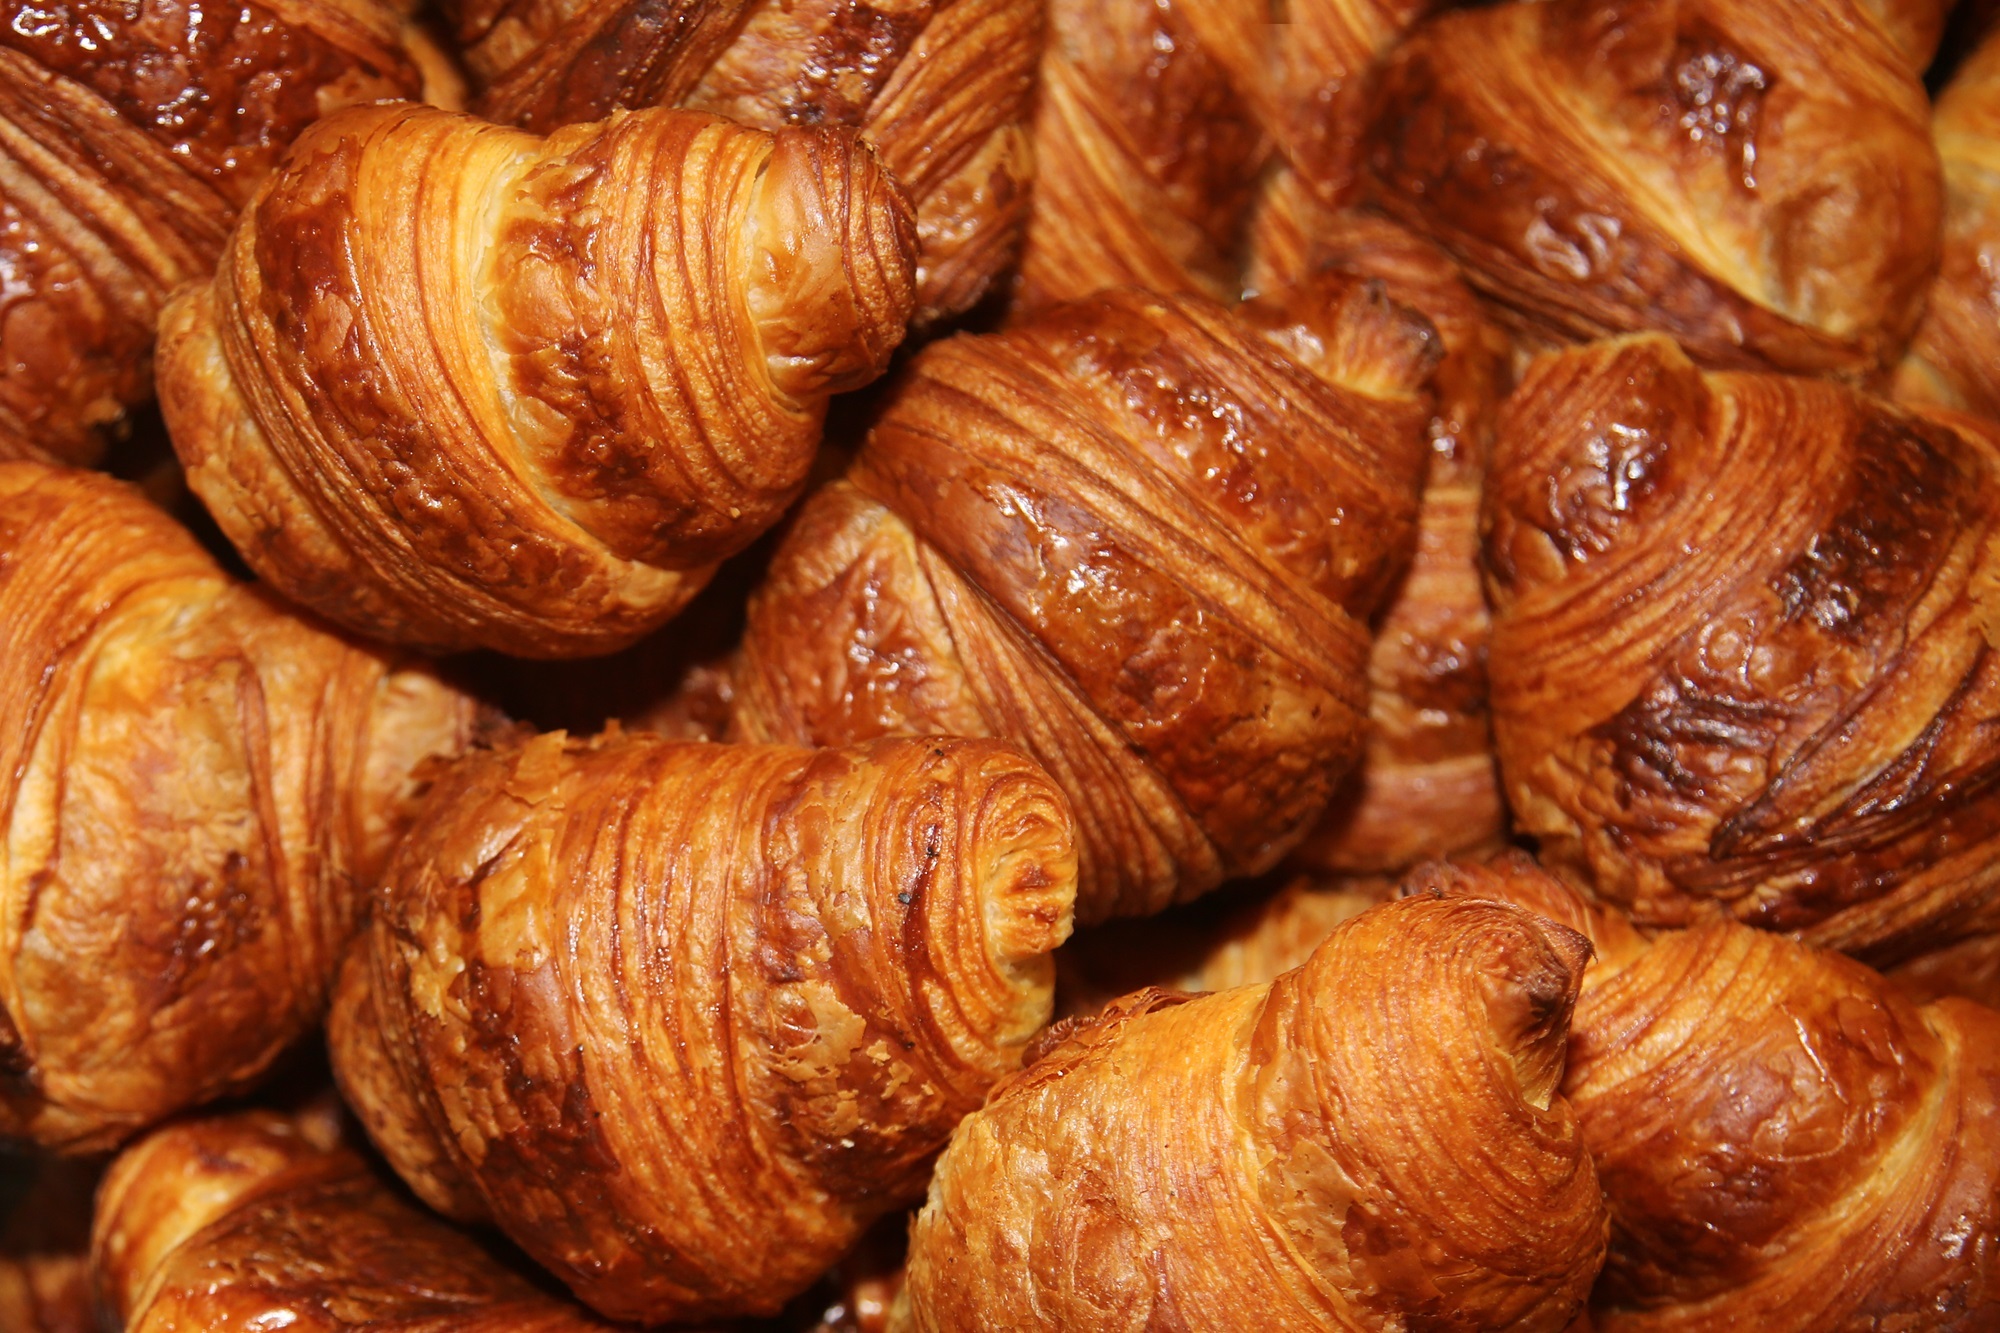 Raf's new Croissant Club will have chef-driven flavors each month